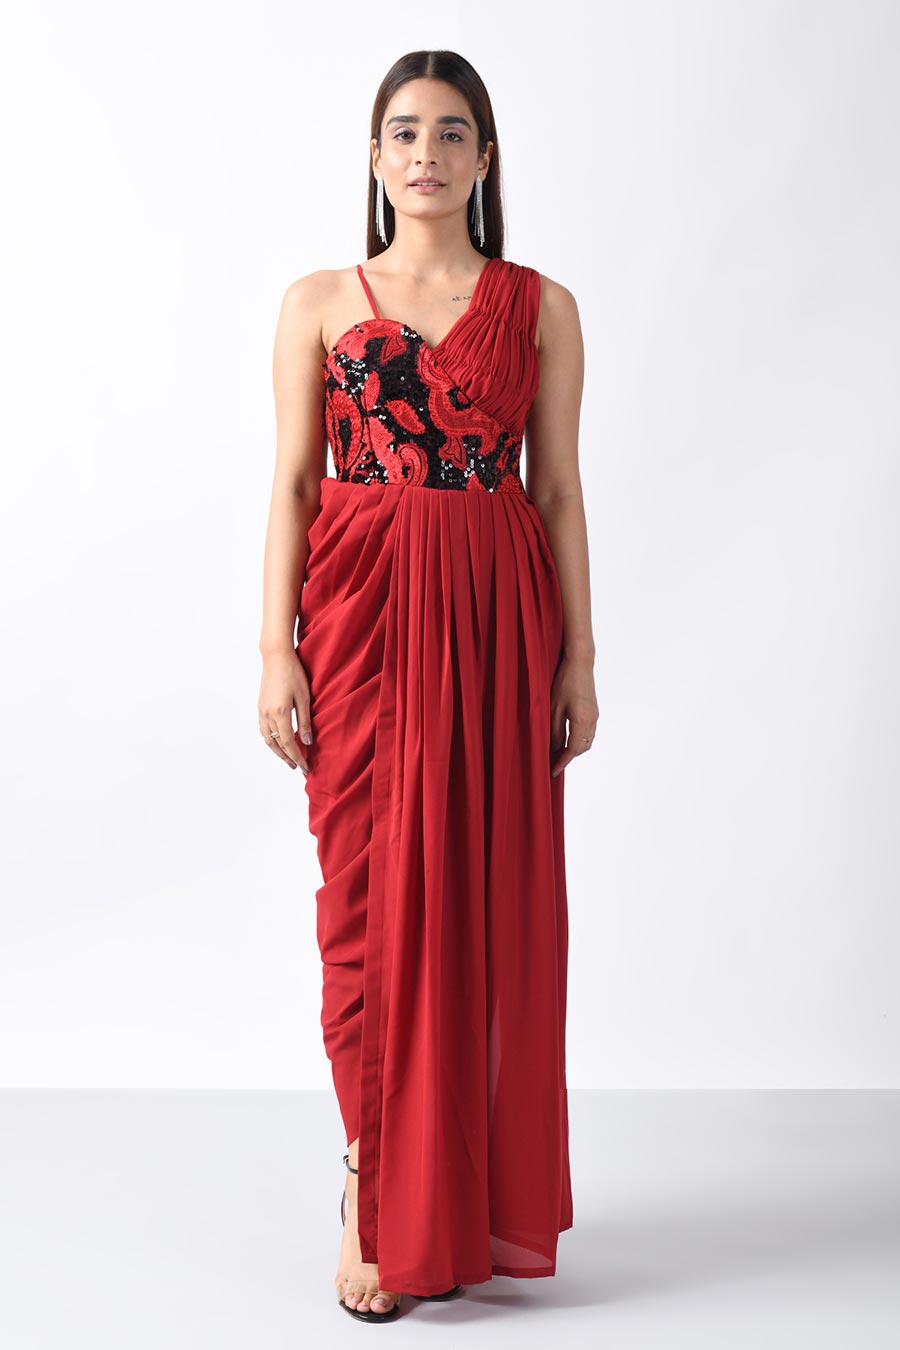 Paola Embroidered Red Drape Dress